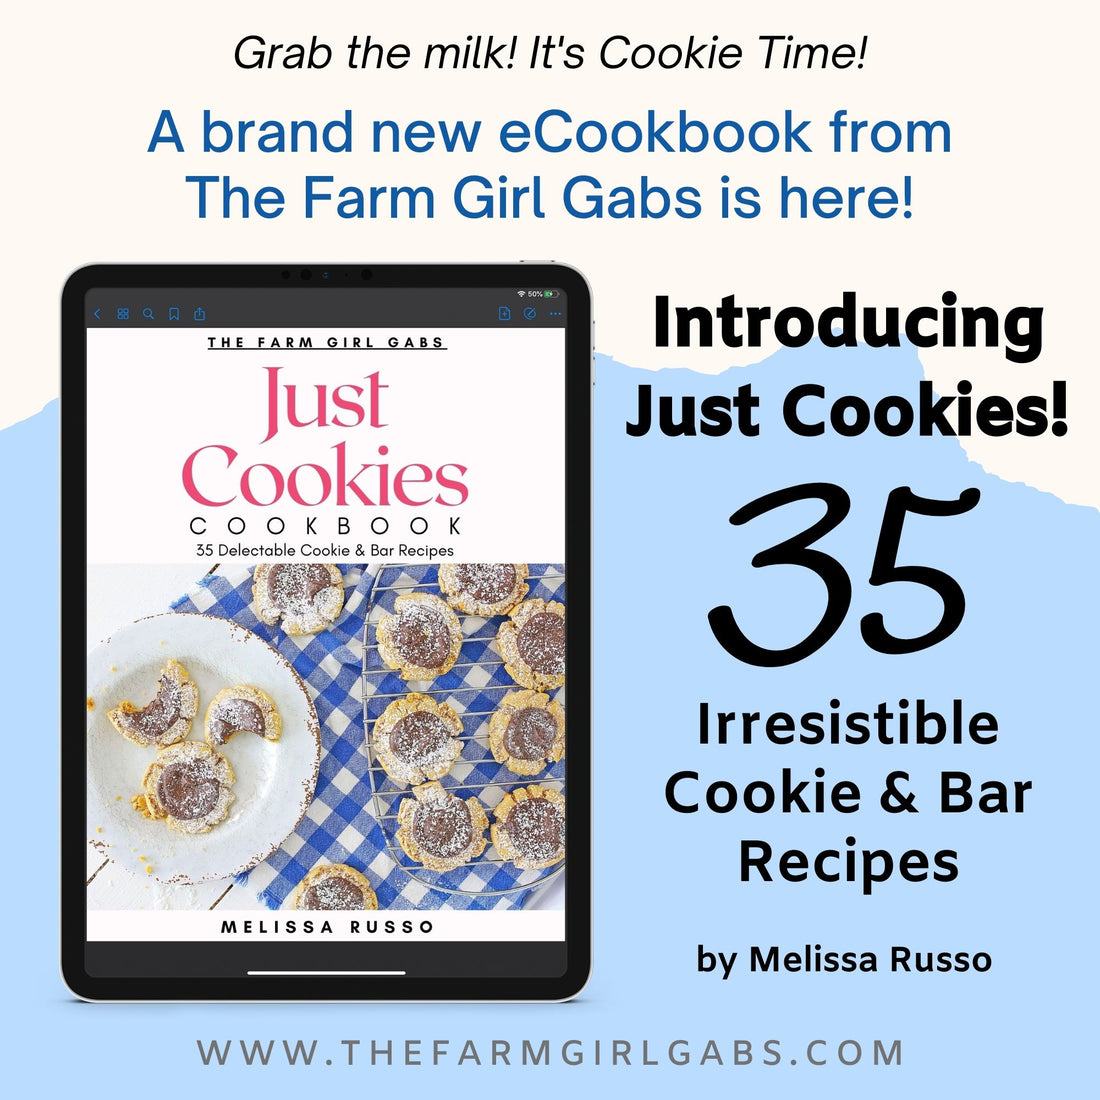 Just cookies is a collection of 35 delicious cookies and bar recipes by Melissa Russo. These cherished recipes have been passed down over the years. In this eBook, you will find the classics like Chocolate Chip and some newer cookie and bar recipes as well. So grab a glass of milk and start baking.